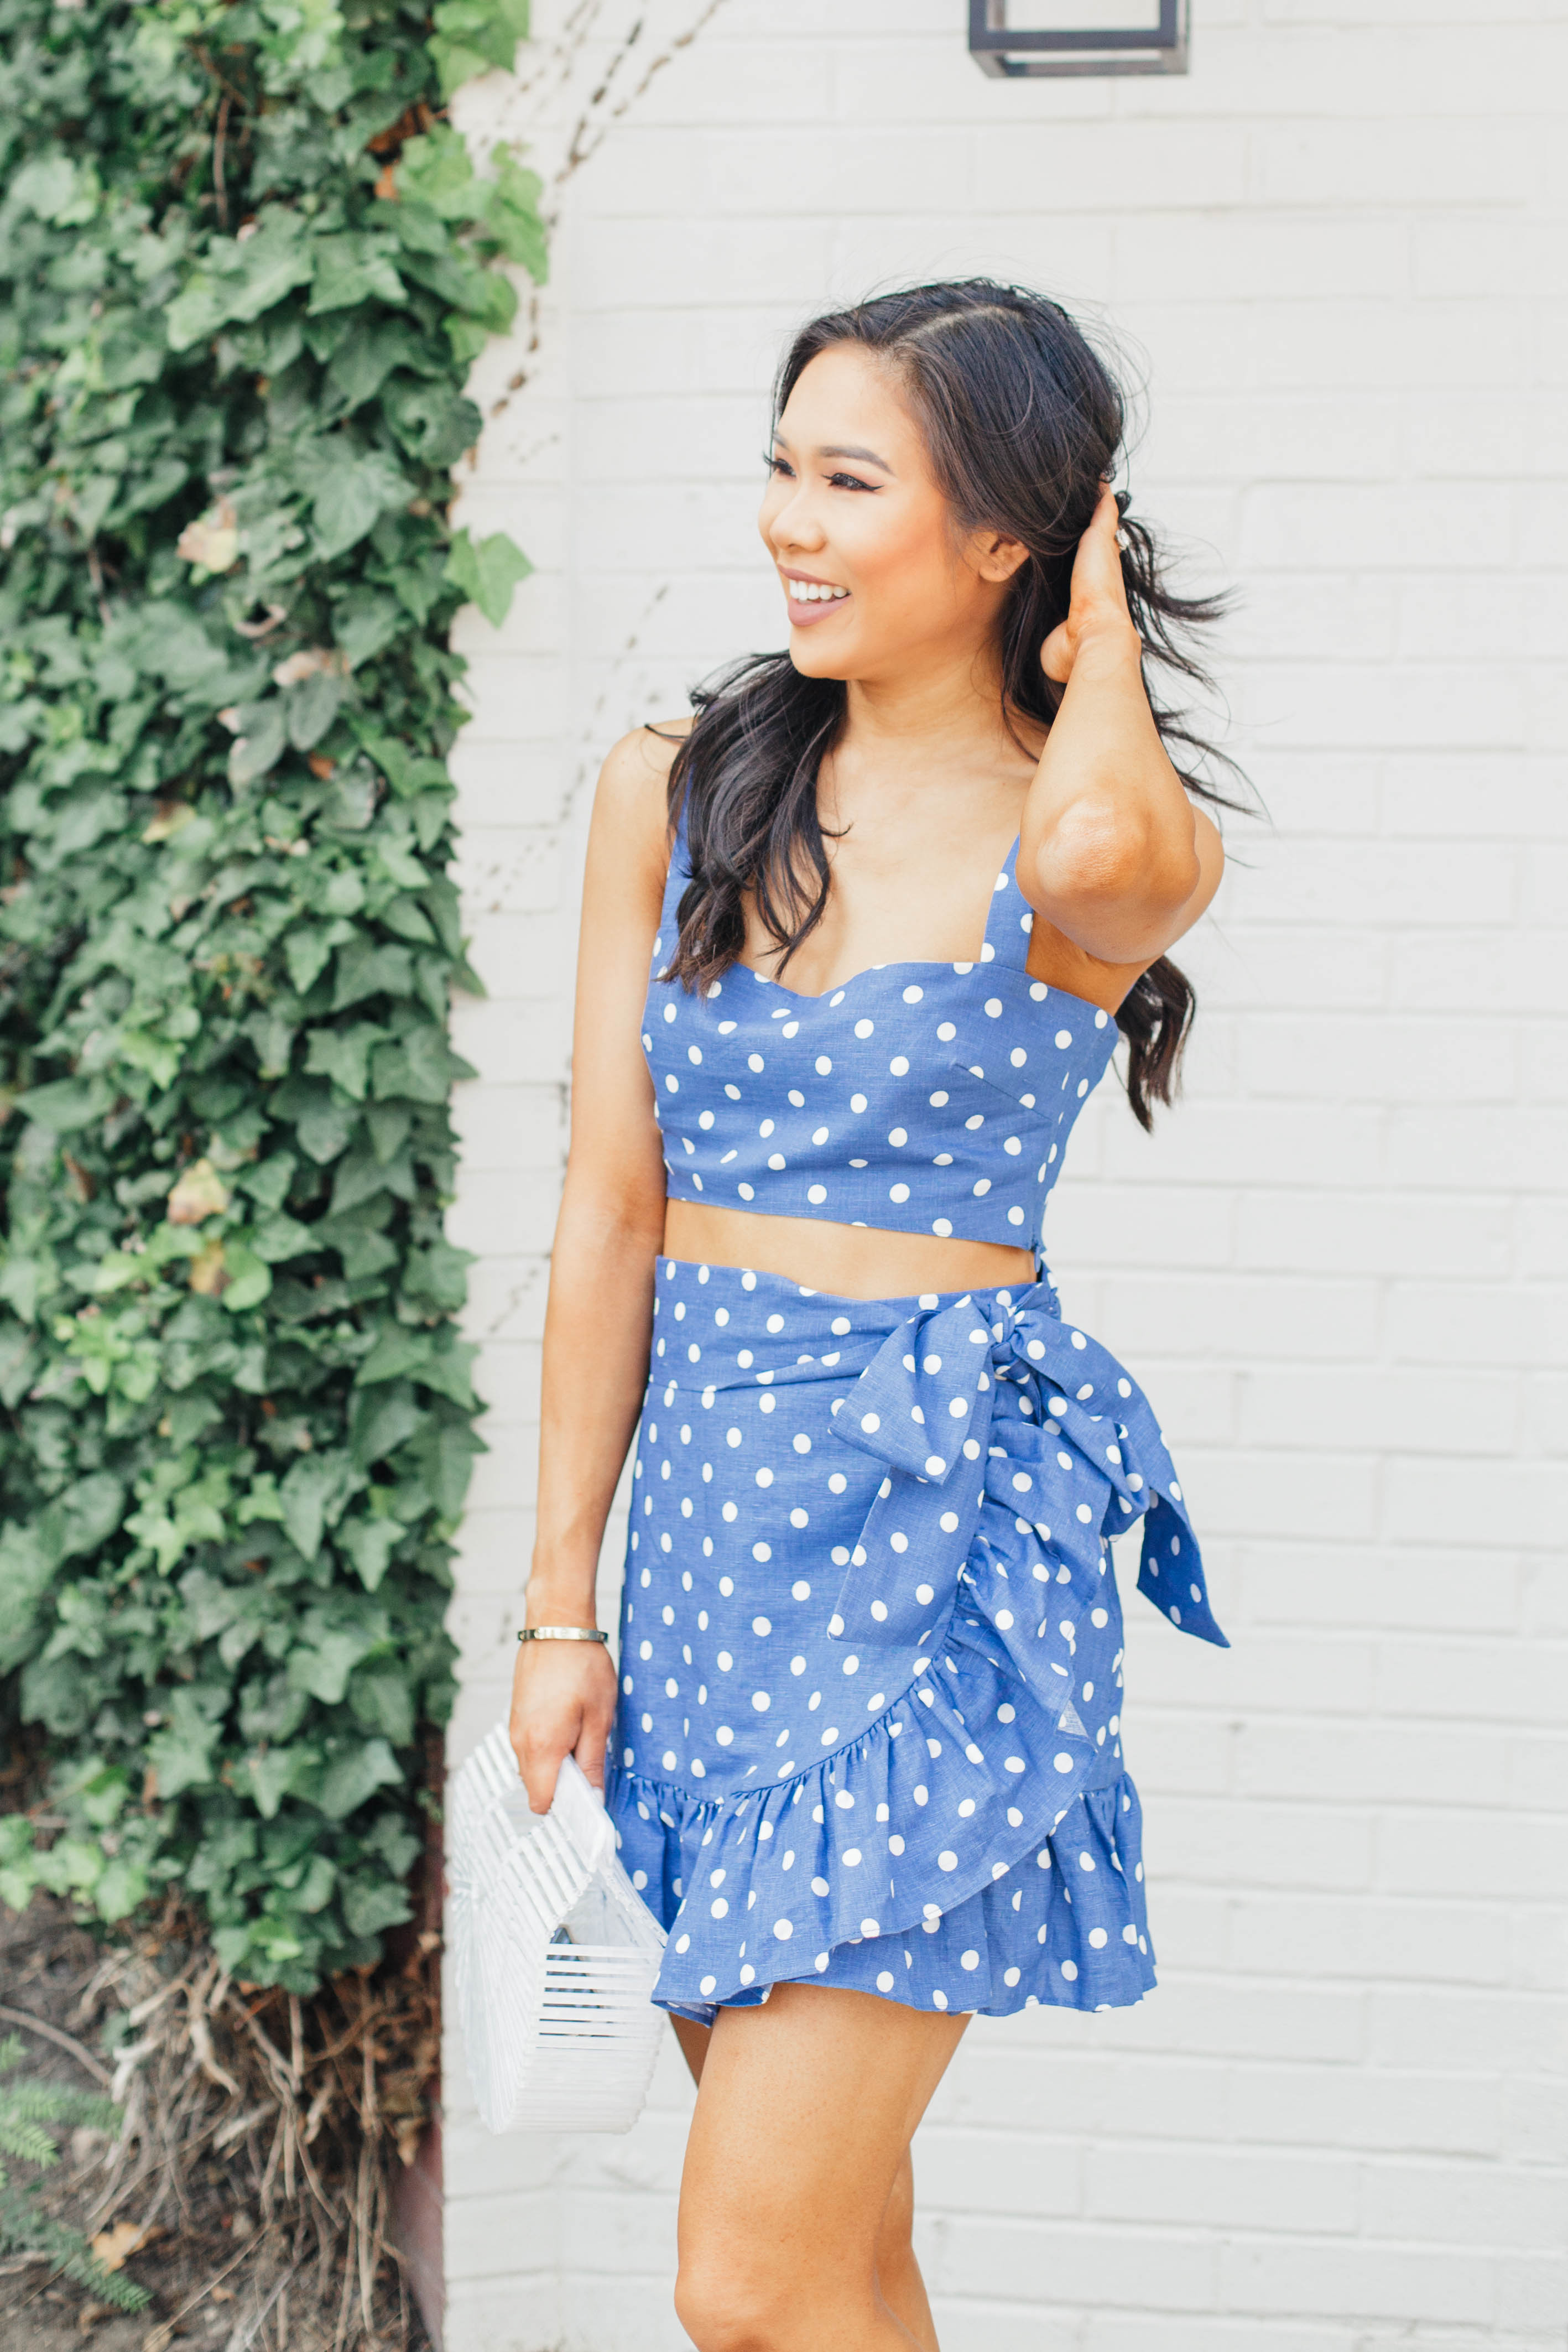 Blue polka-dot two piece set with white acrylic bag and suede sandals for a summer outfit